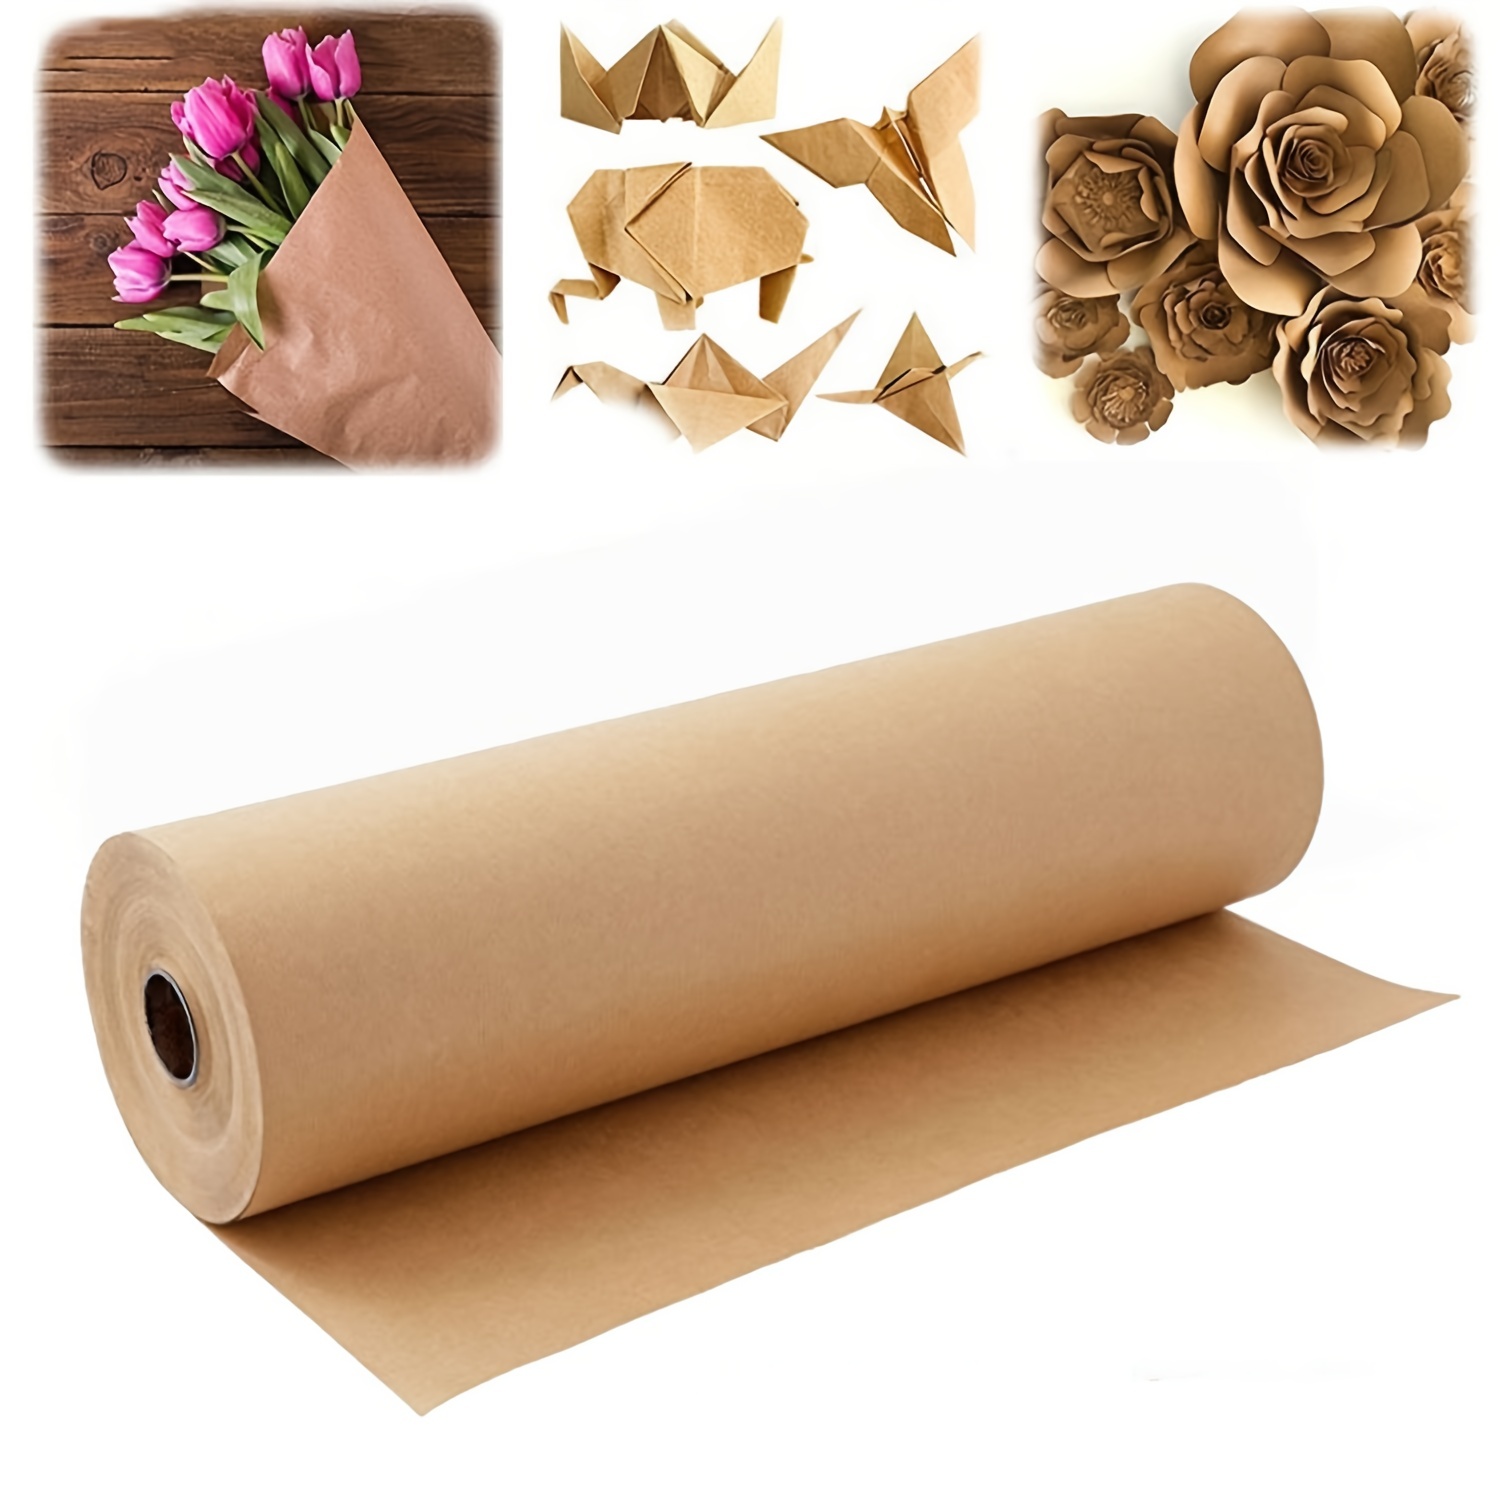 Brown Paepr Roll 15×400, Brown Wrapping Paper, Wrapping Paper, Craft  Paper, Packing Paper For Moving, Packing, Gift Wrapping, Wall Art, Table  Runner